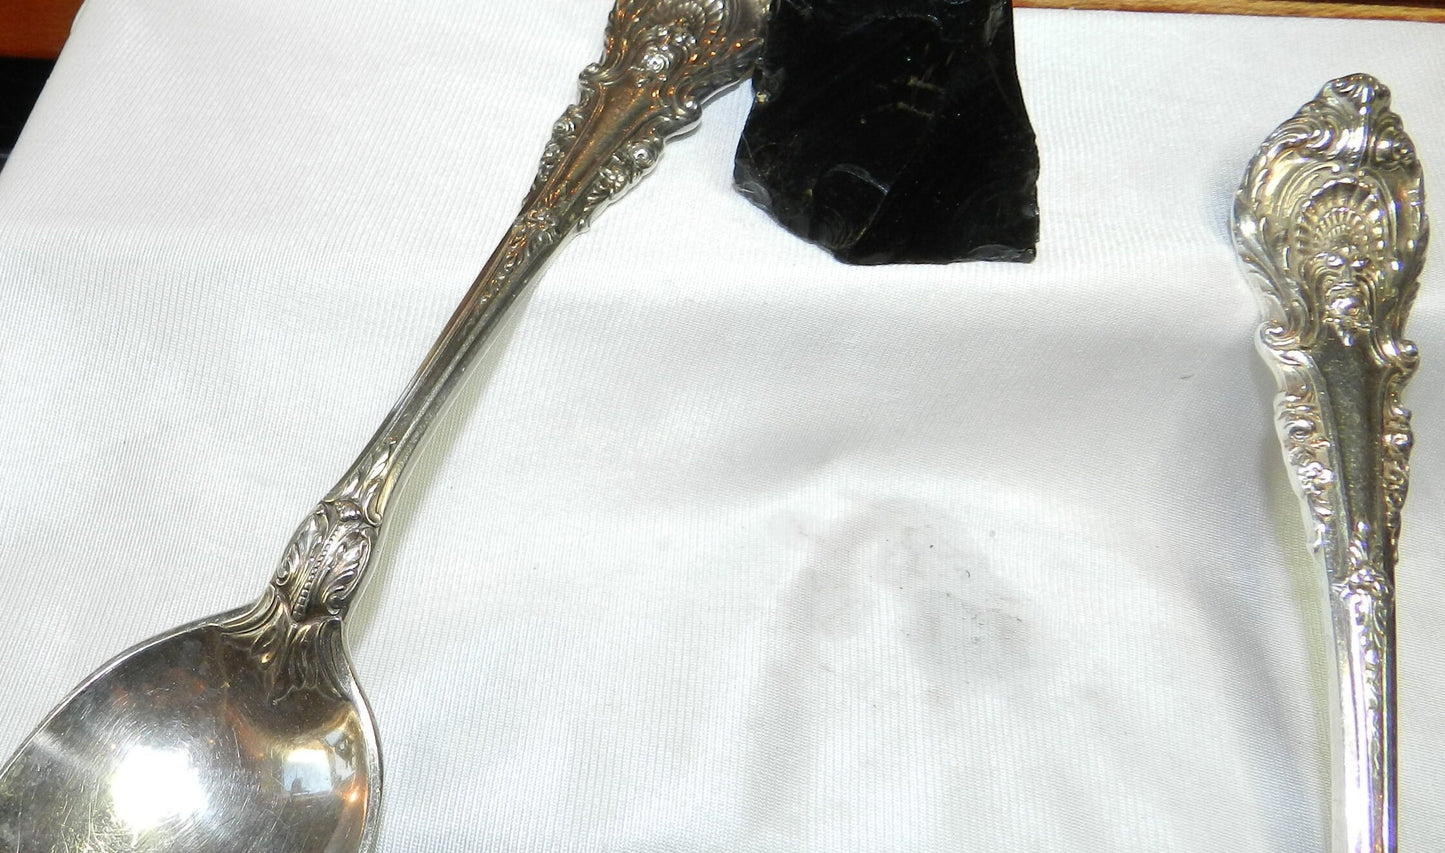 2 Vintage Large Sterling Silver Wallace Serving Spoons - Sir Christopher Pattern - 925 Authentic - Rare